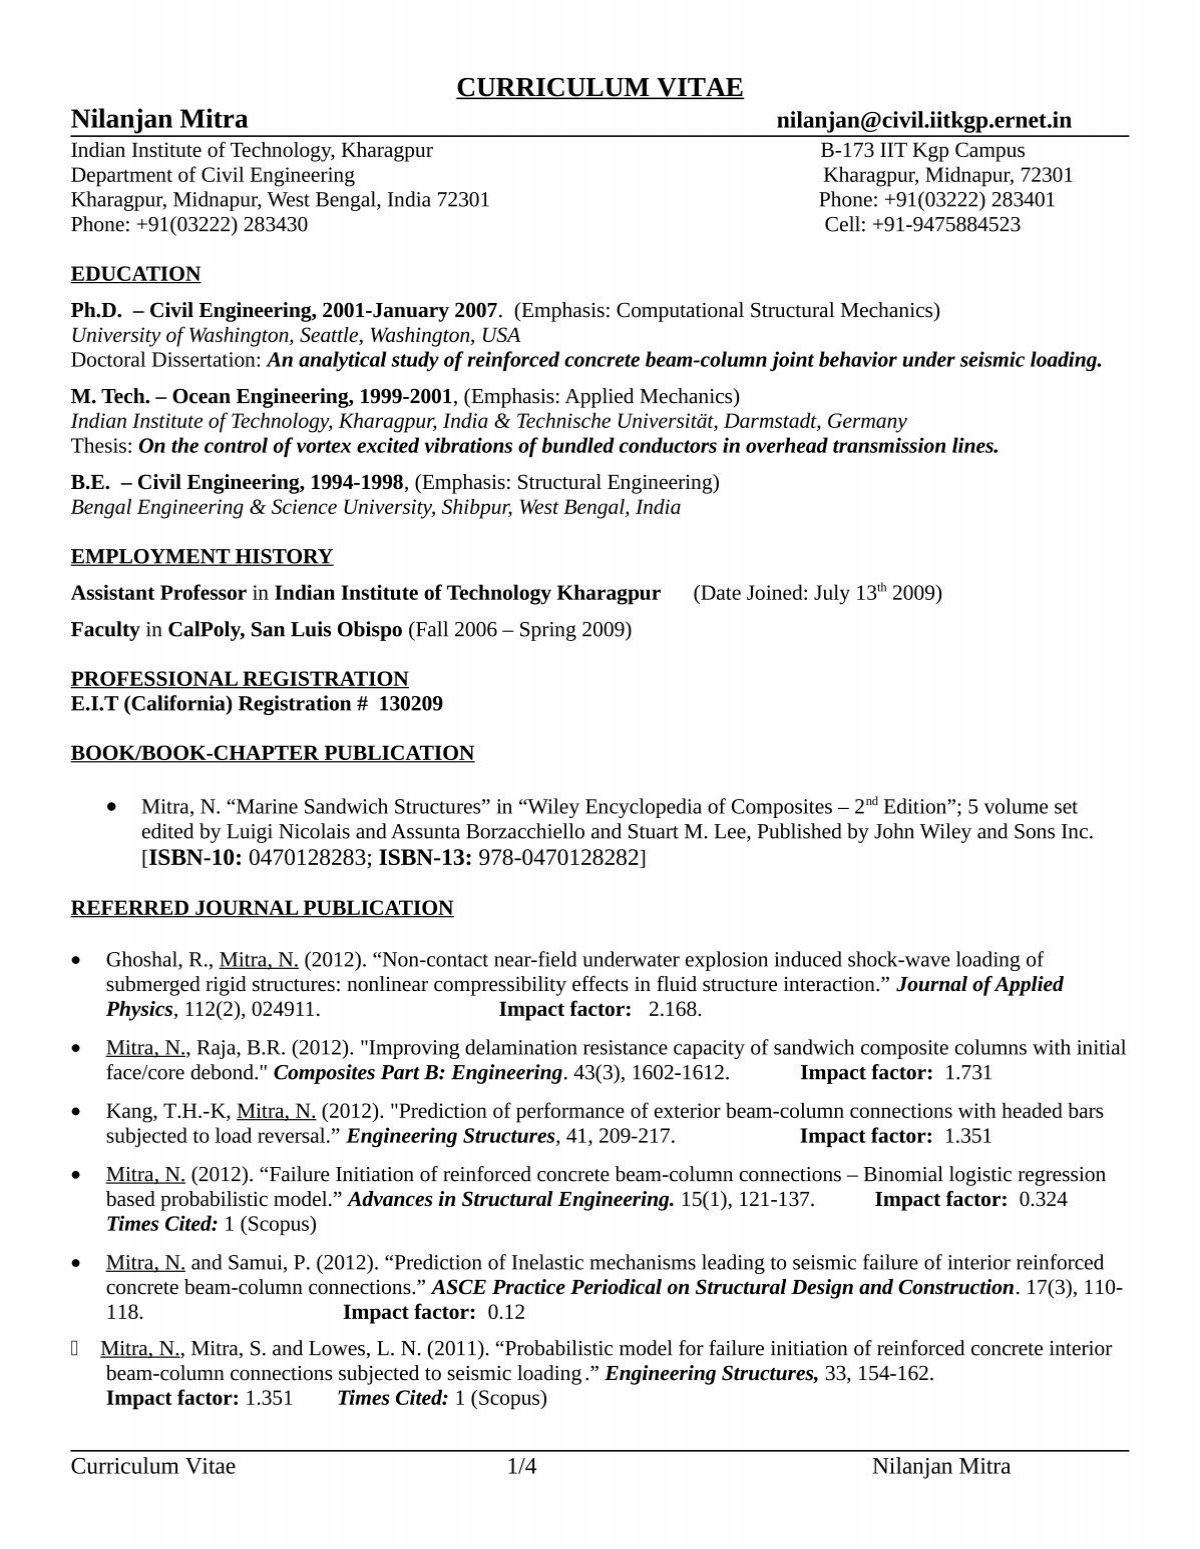 Current CV - Indian Institute of Technology Kharagpur